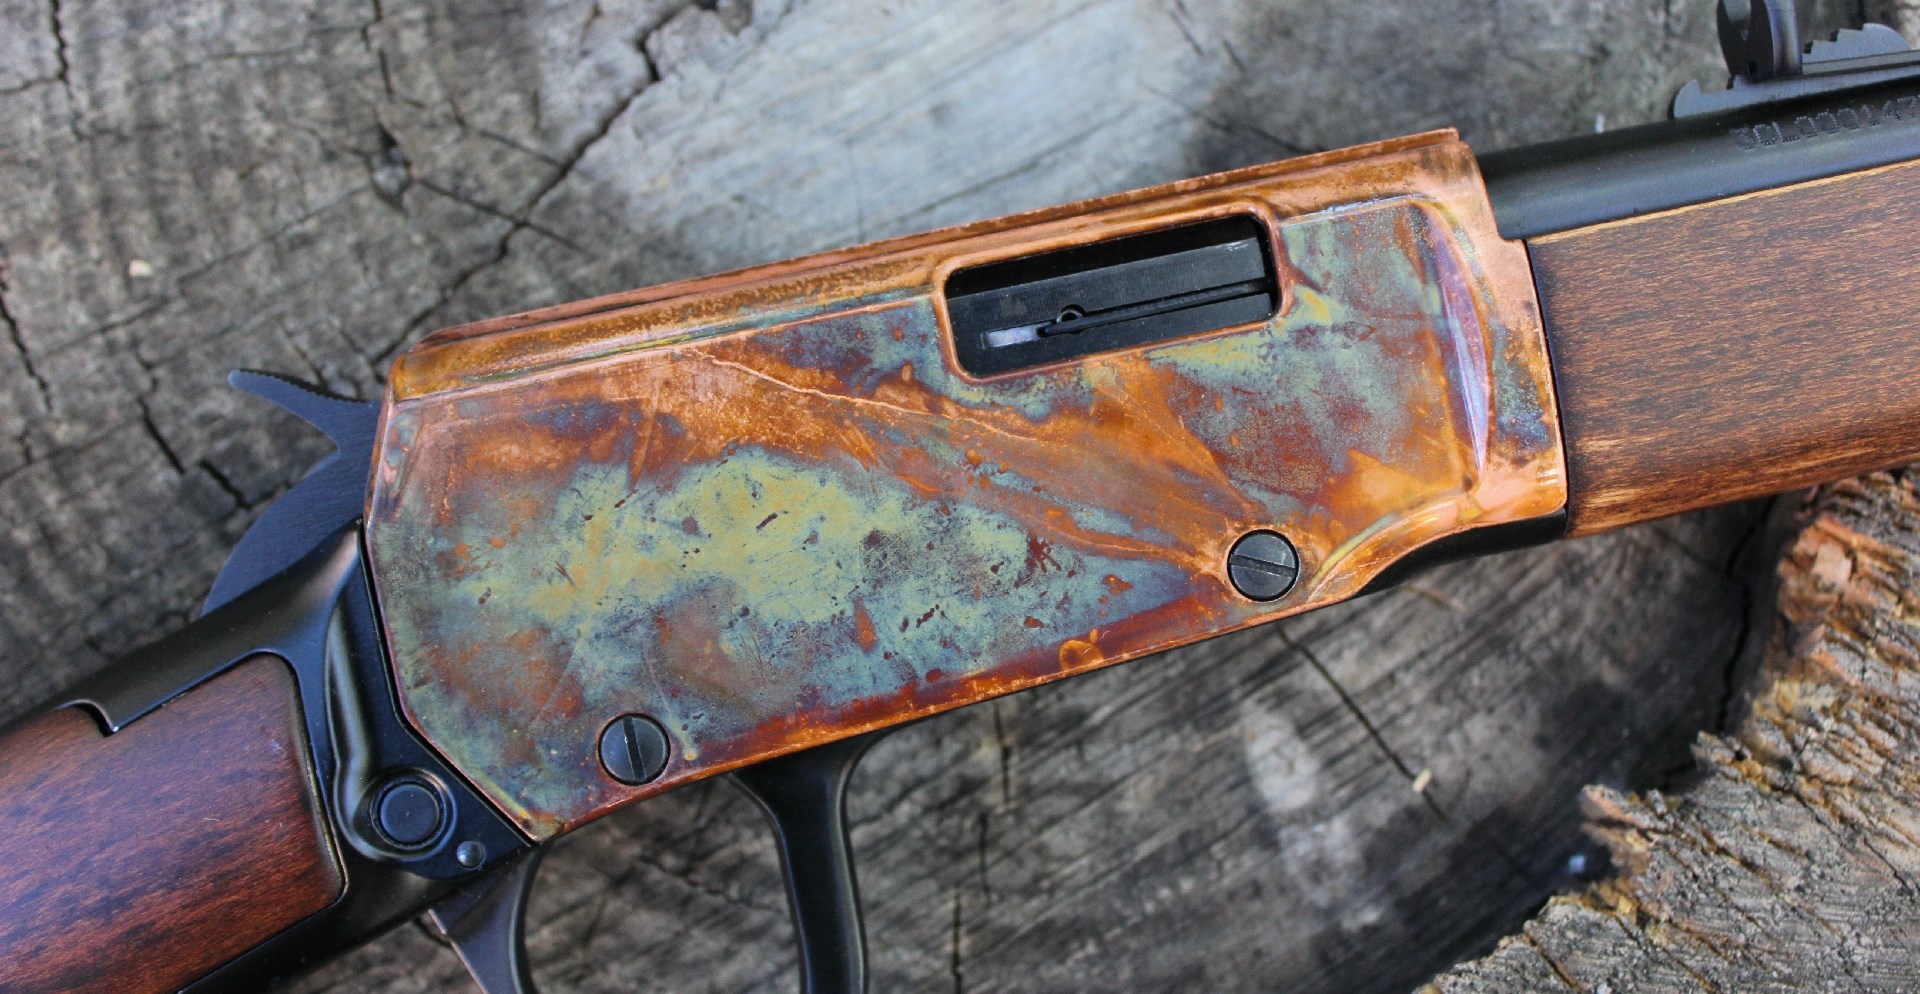 Right side view of the simulated case hardened receiver finish on the Heritage Settler Mare's Leg.